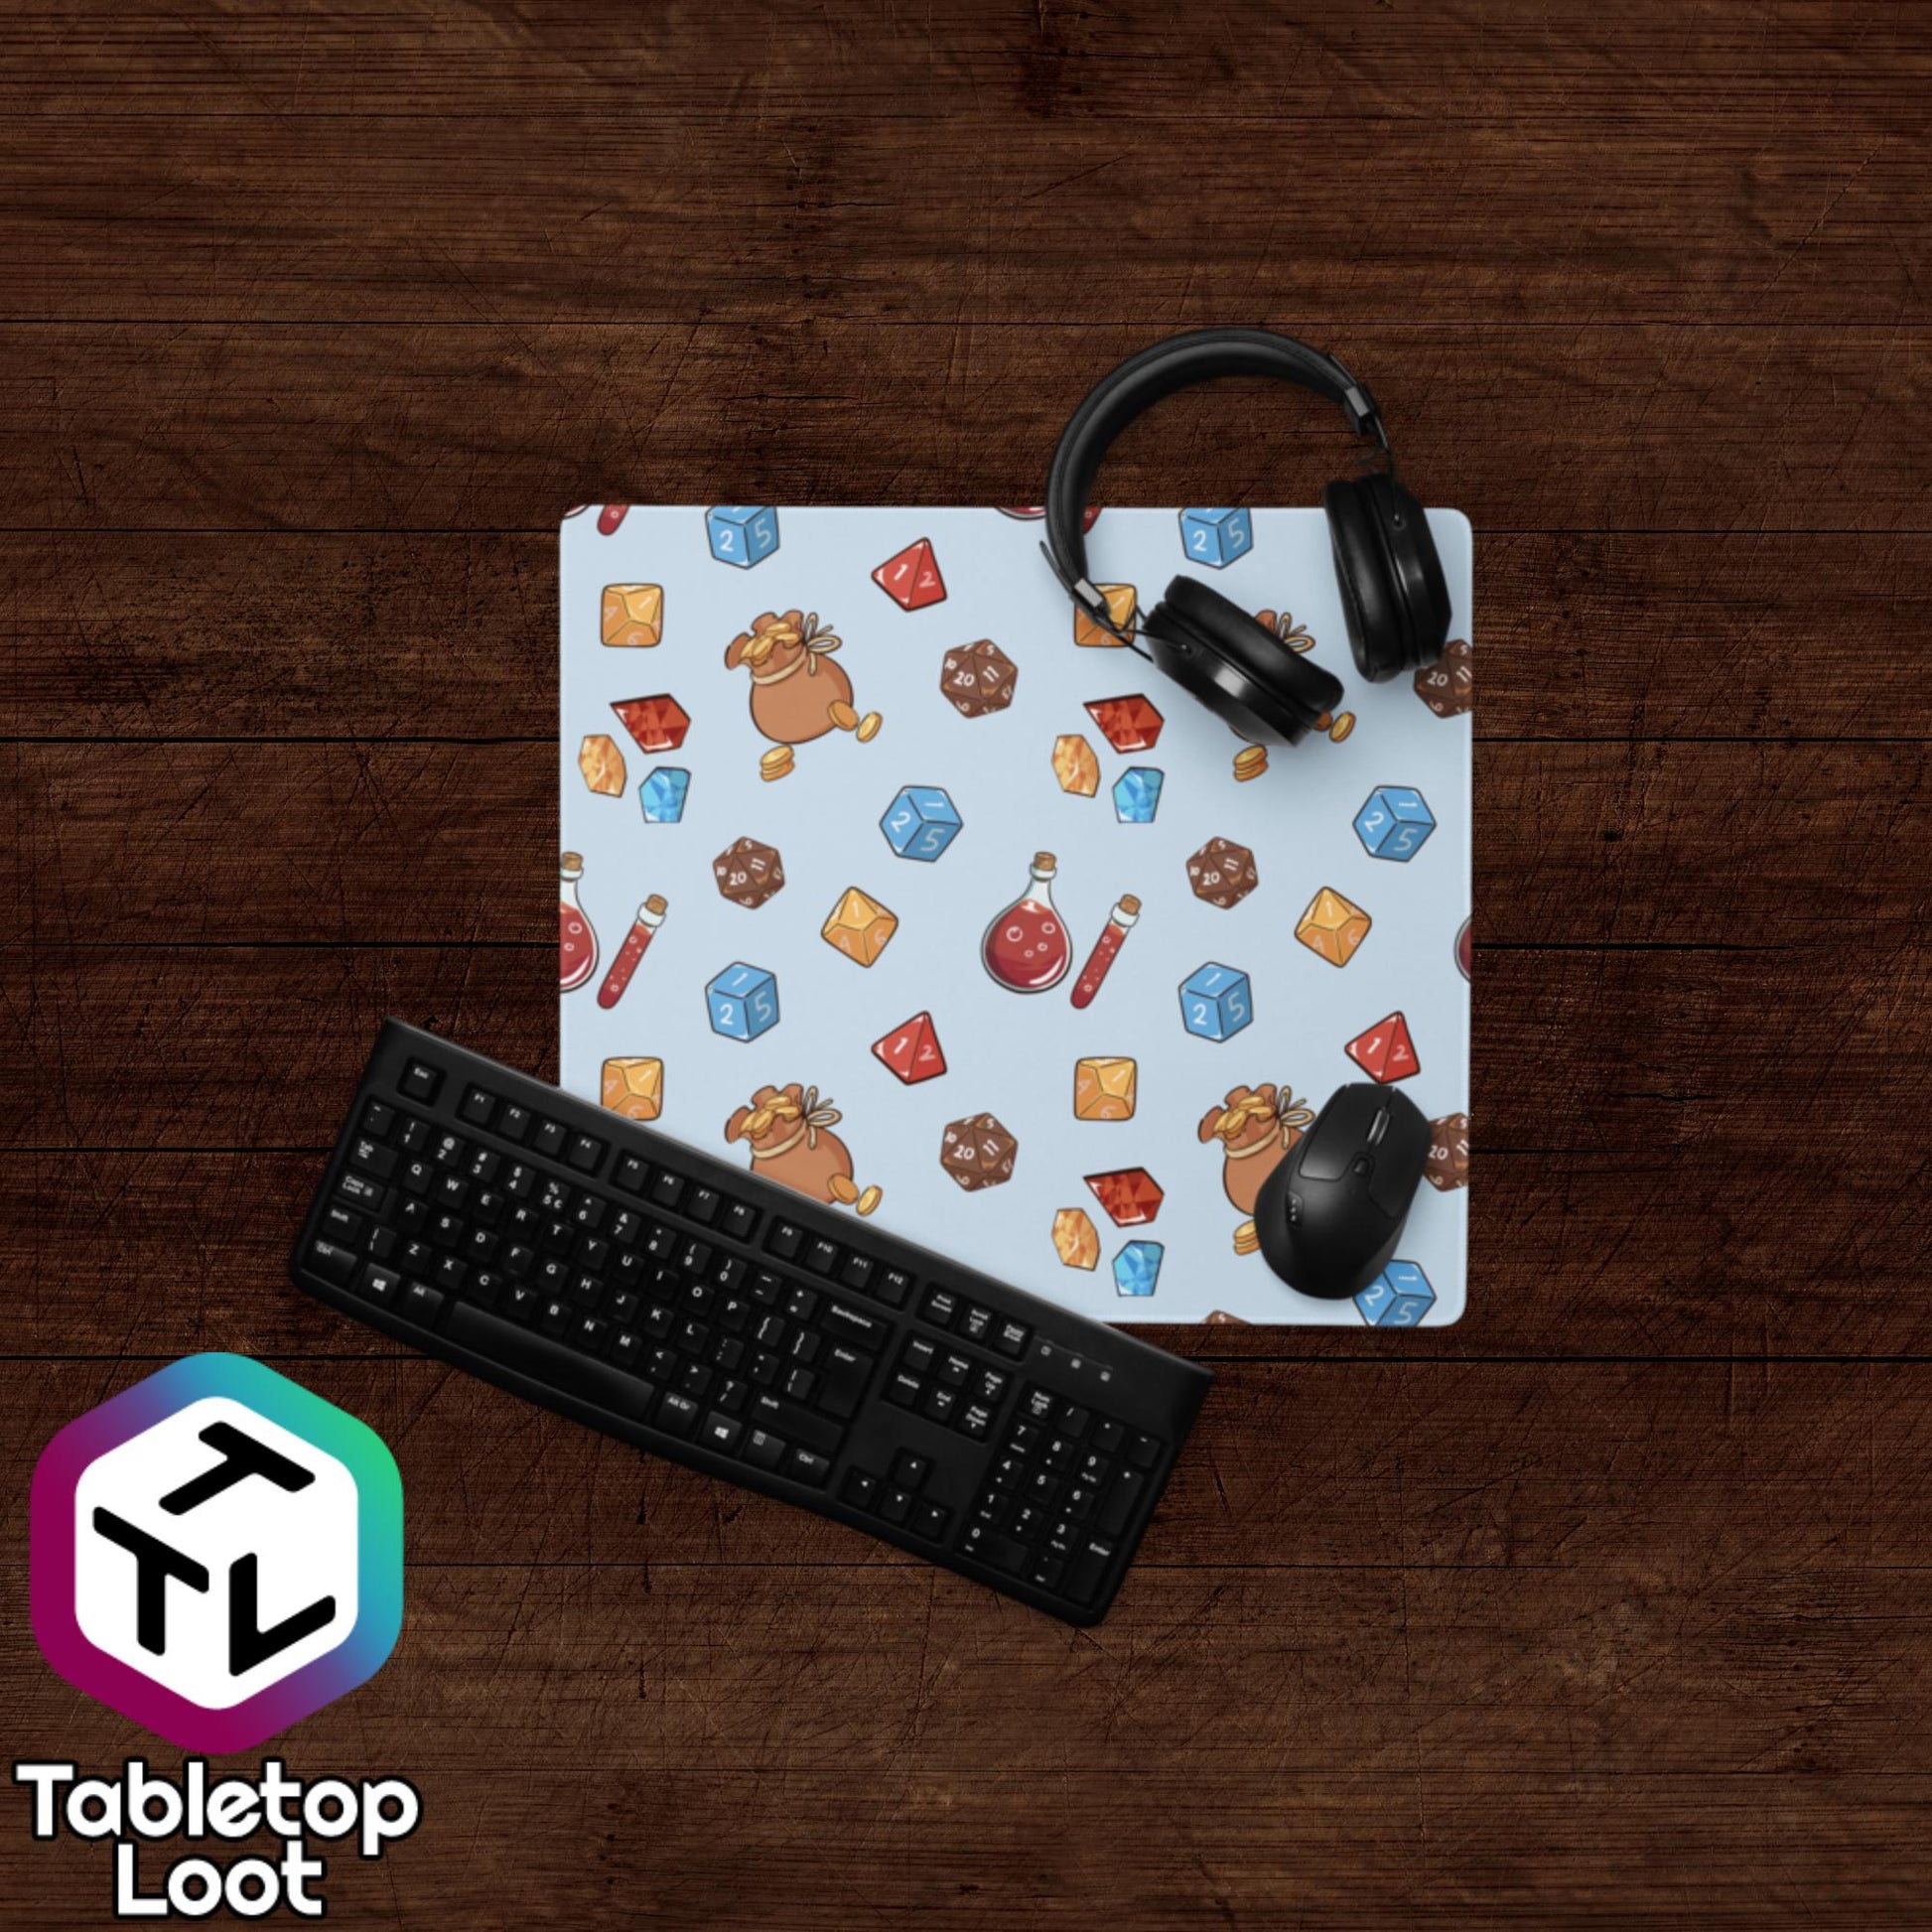 The Loot 18 inch by 16 inch size mouse pad from Tabletop Loot has a pattern of illustrated tabletop trinkets including bags of gold, dice, gems, and potions.